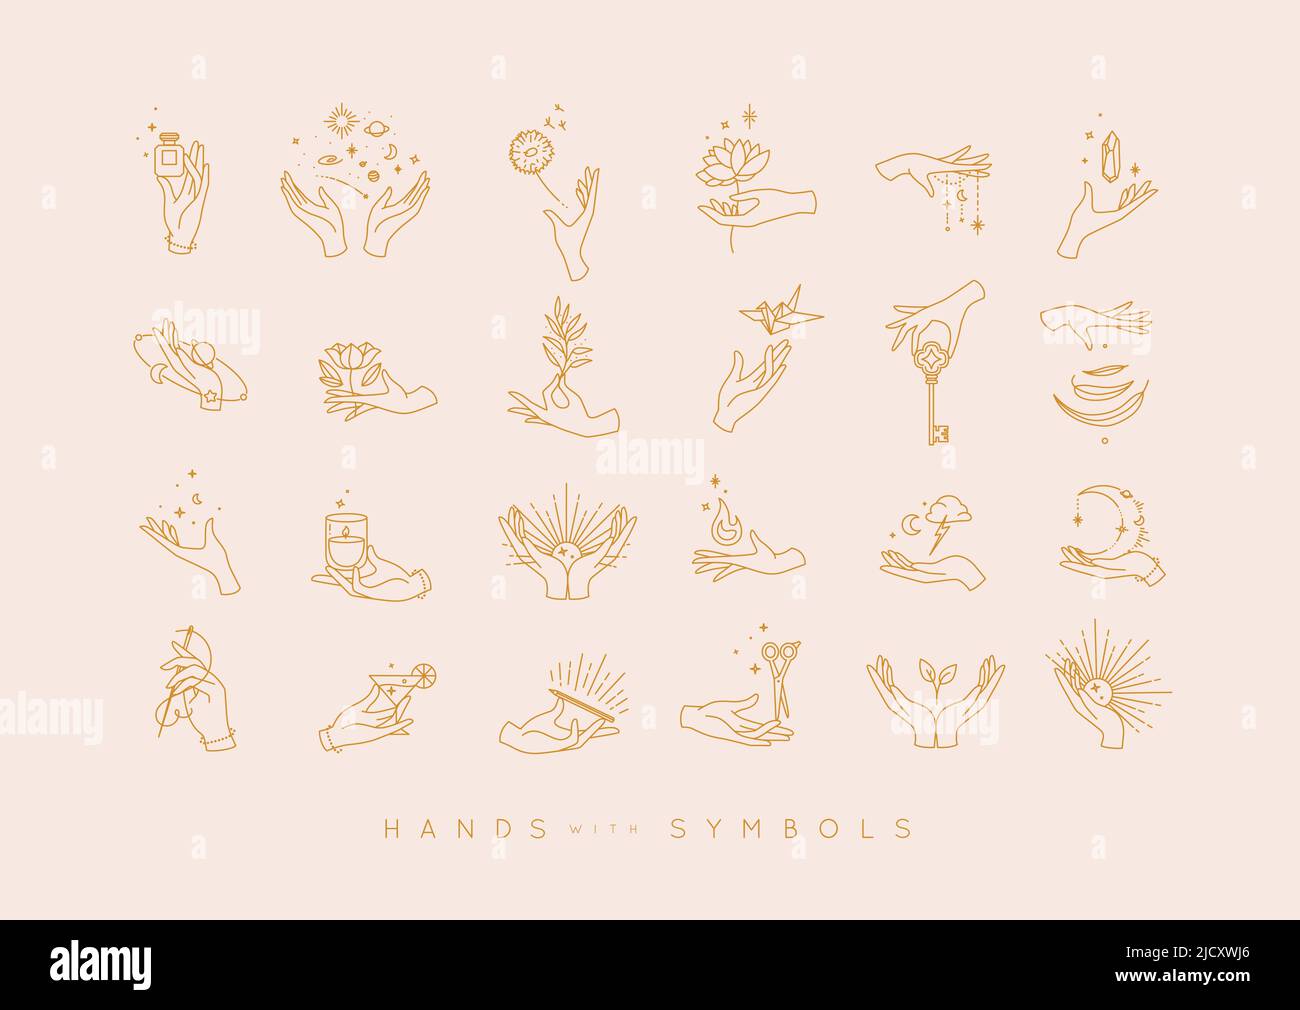 Hands in different positions with symbols and elements moon, sun, flowers, perfume, fire, cocktail, origami, key, stone, leaf, drawing in line style o Stock Vector